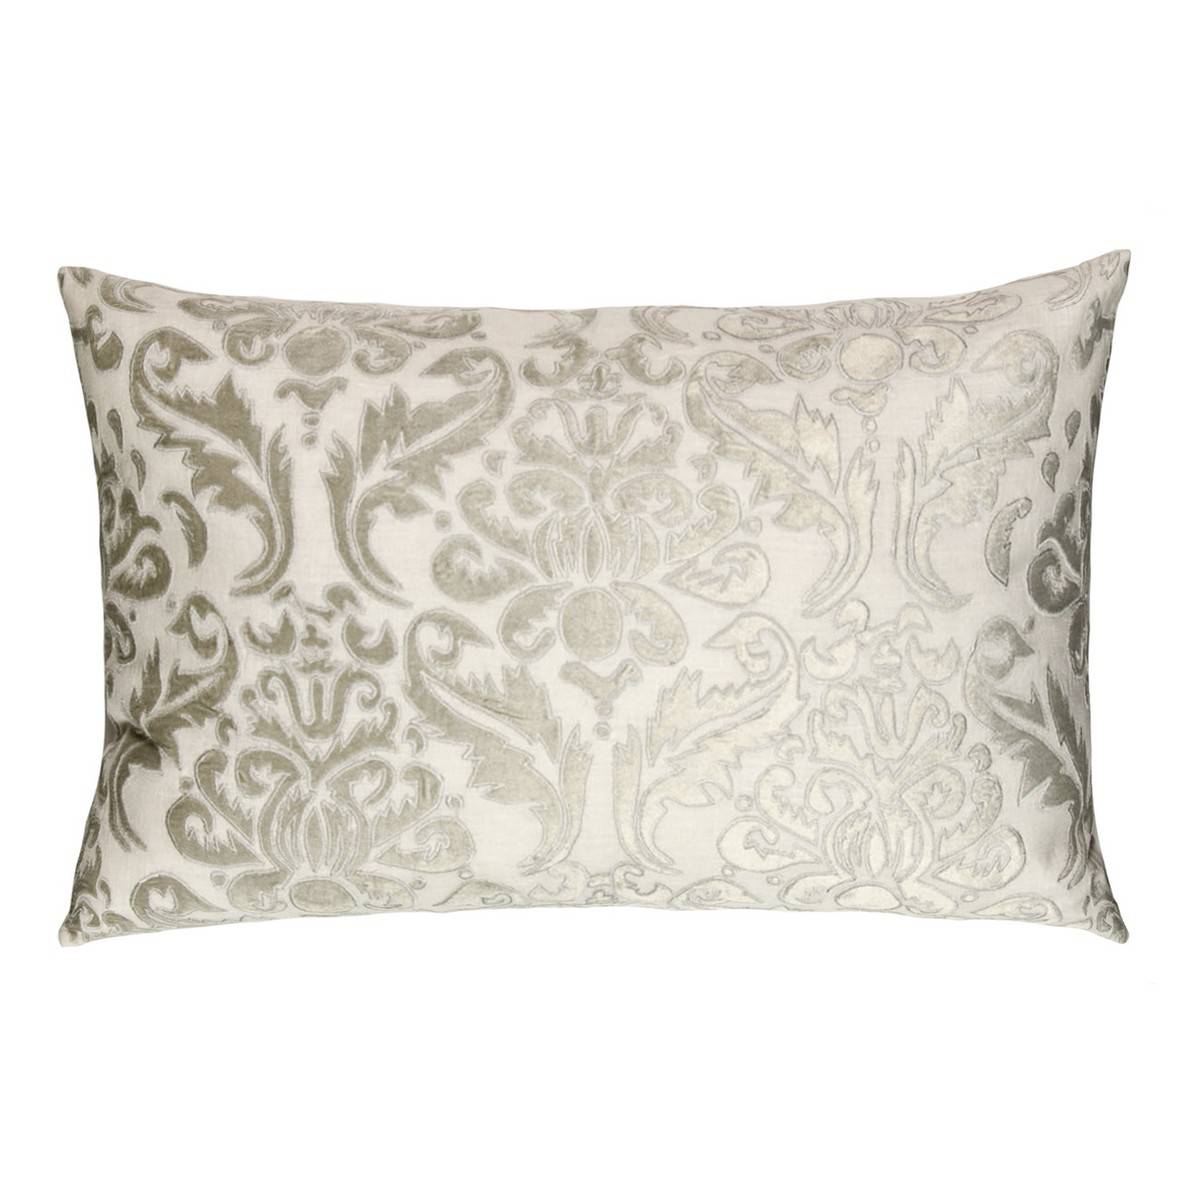 Lili Alessandra Hand Appliqued Pillows in White Linen with Silver ...